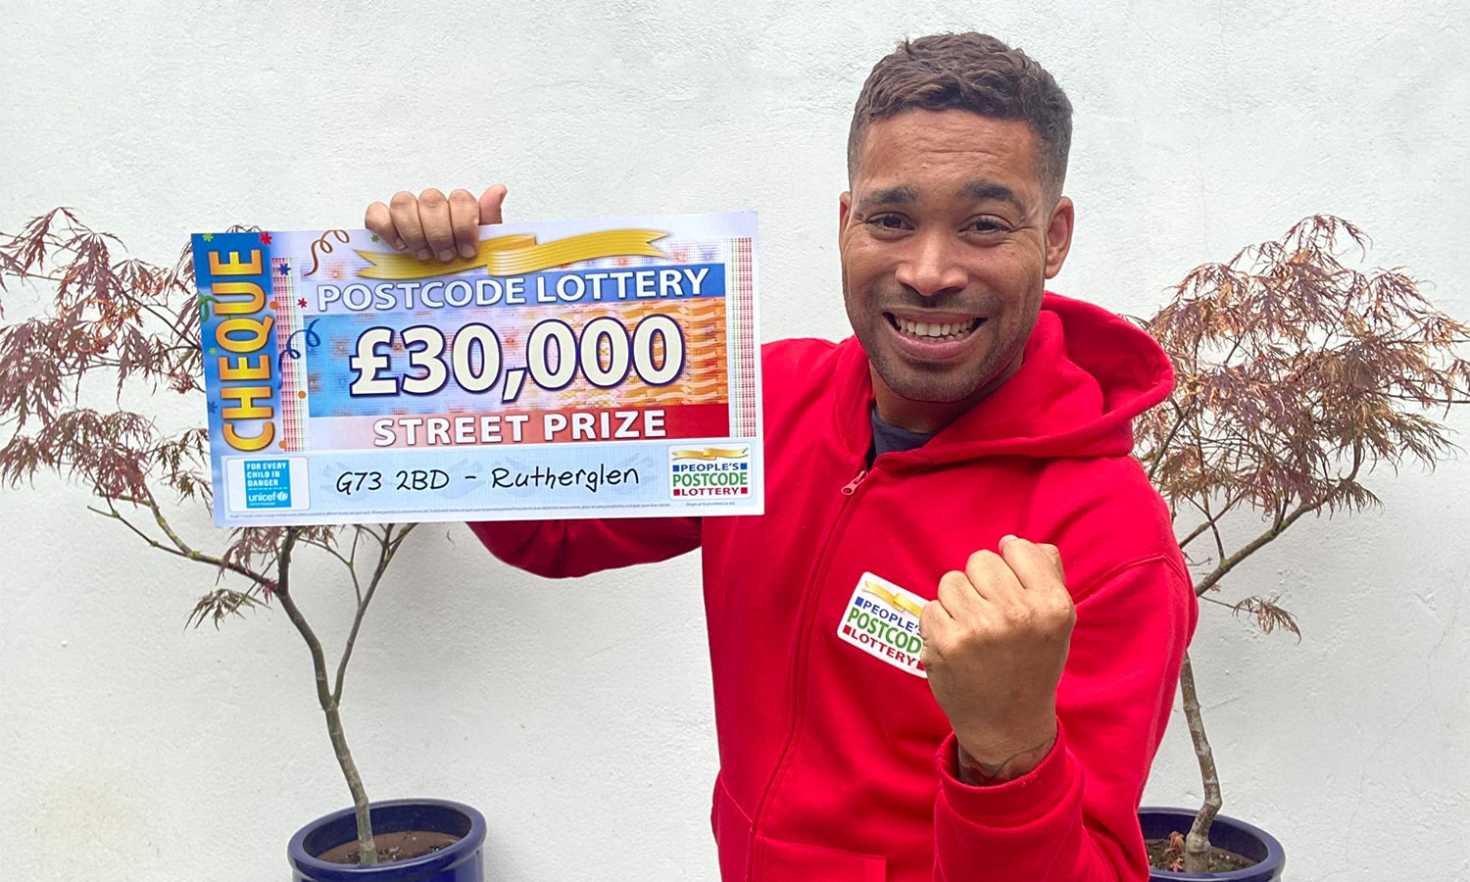 Today's £30,000 Street Prize cheques are heading to seven lucky players in Rutherglen